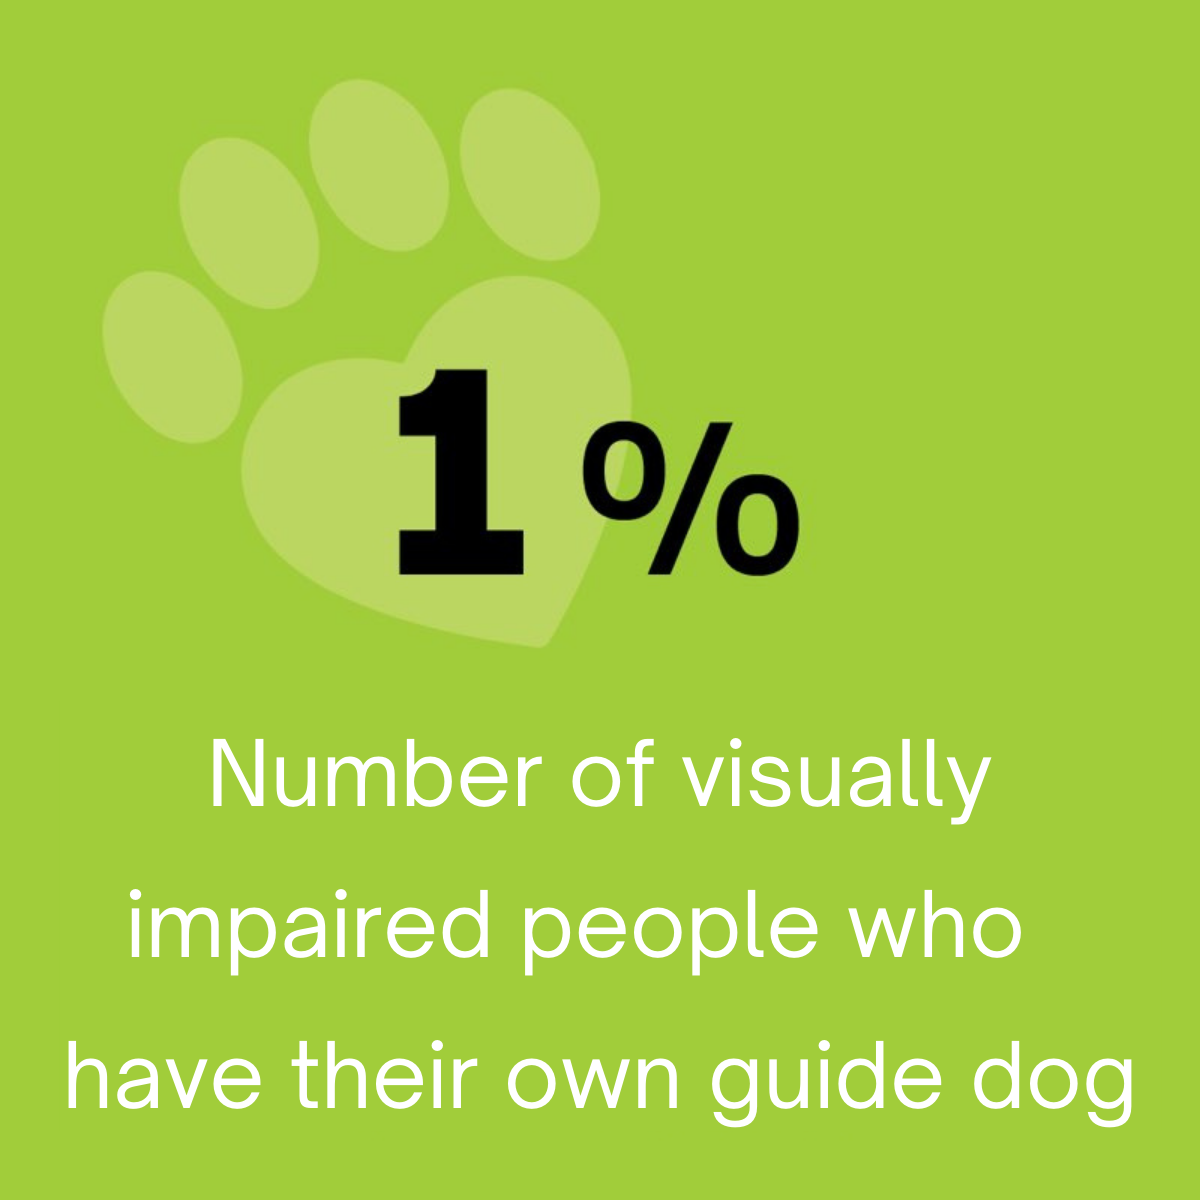 1% number of visually impaired people who have their own guide dog